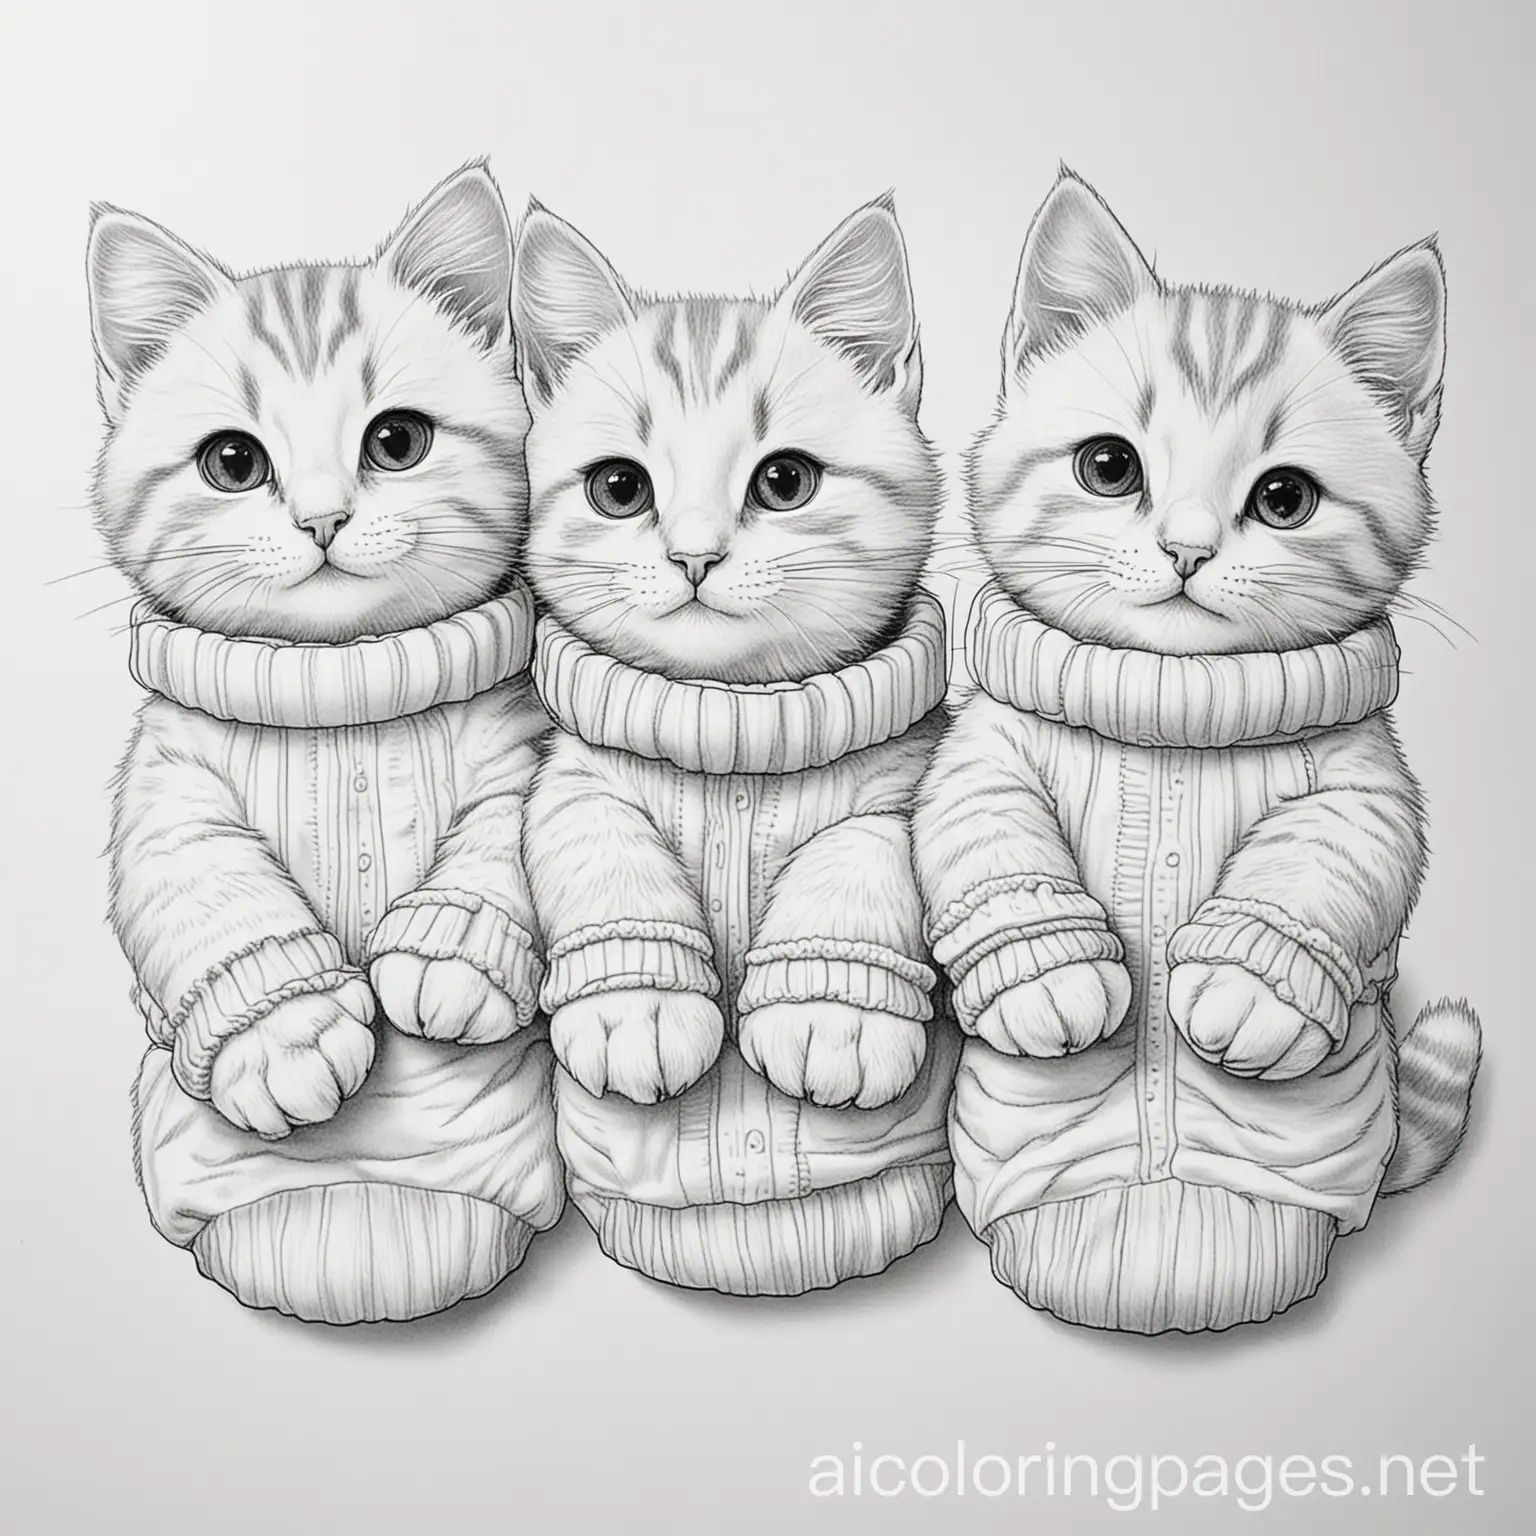 3 kittens with mittens, Coloring Page, black and white, line art, white background, Simplicity, Ample White Space. The background of the coloring page is plain white to make it easy for young children to color within the lines. The outlines of all the subjects are easy to distinguish, making it simple for kids to color without too much difficulty